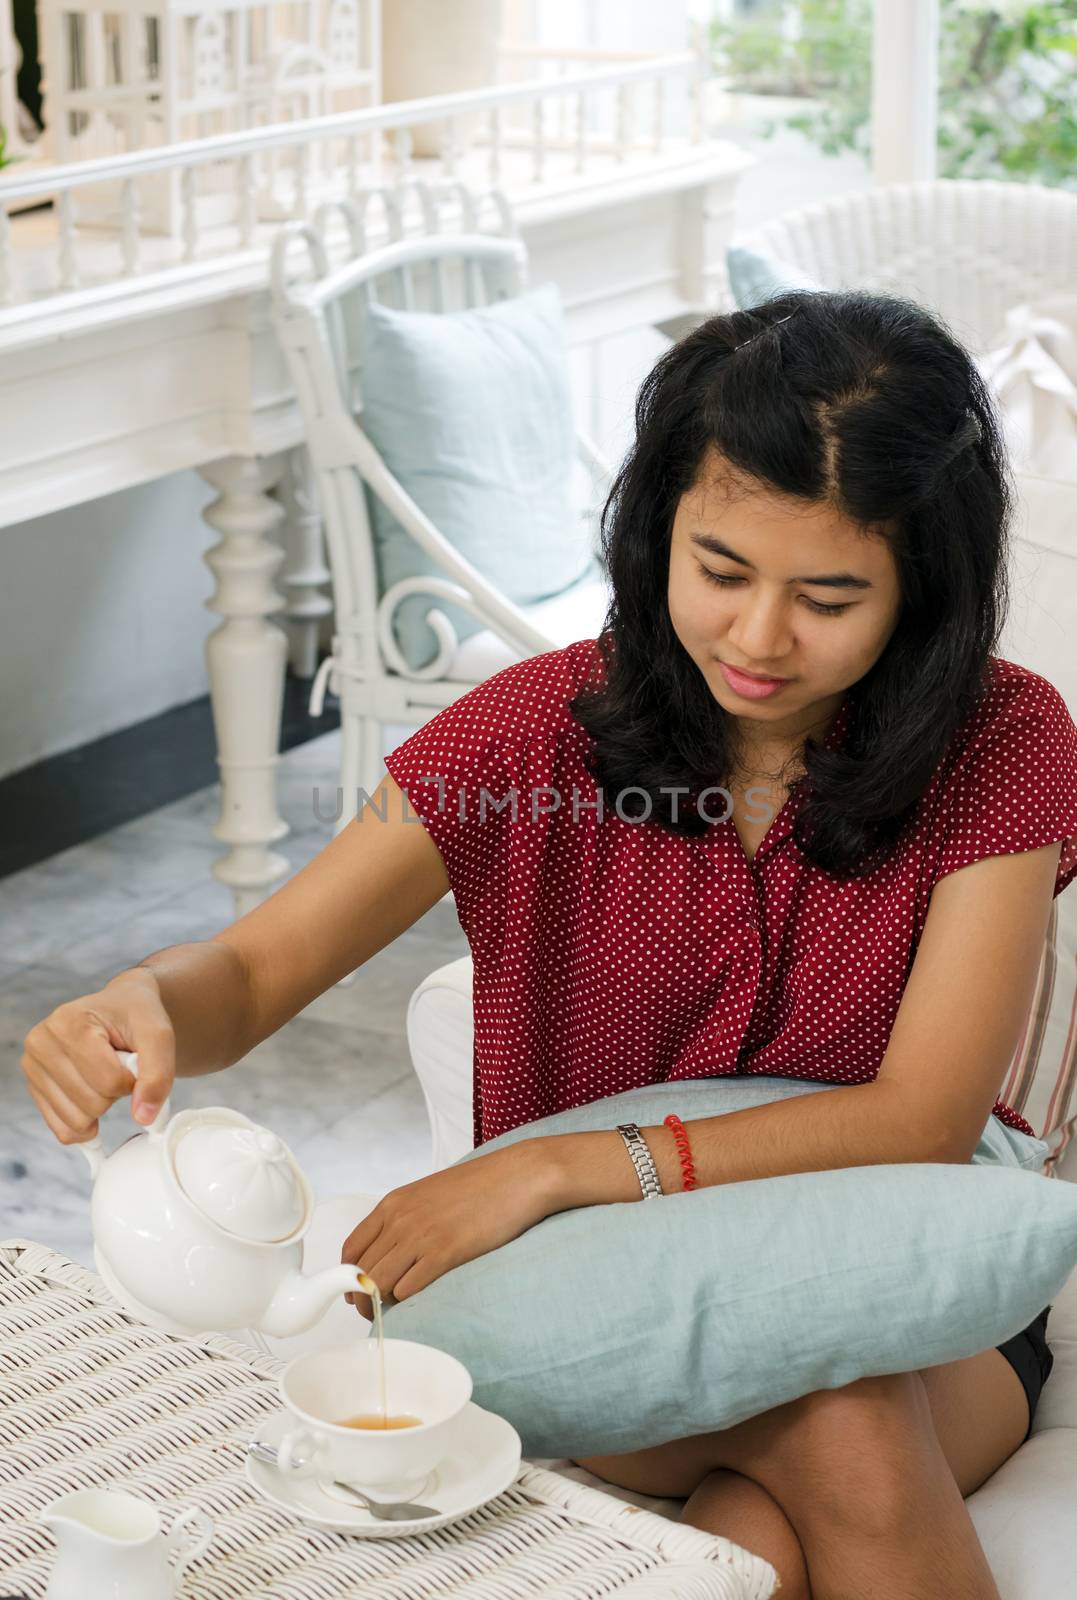 Woman pouring tea from the teapot into a white ceramic cup at vintage cafe